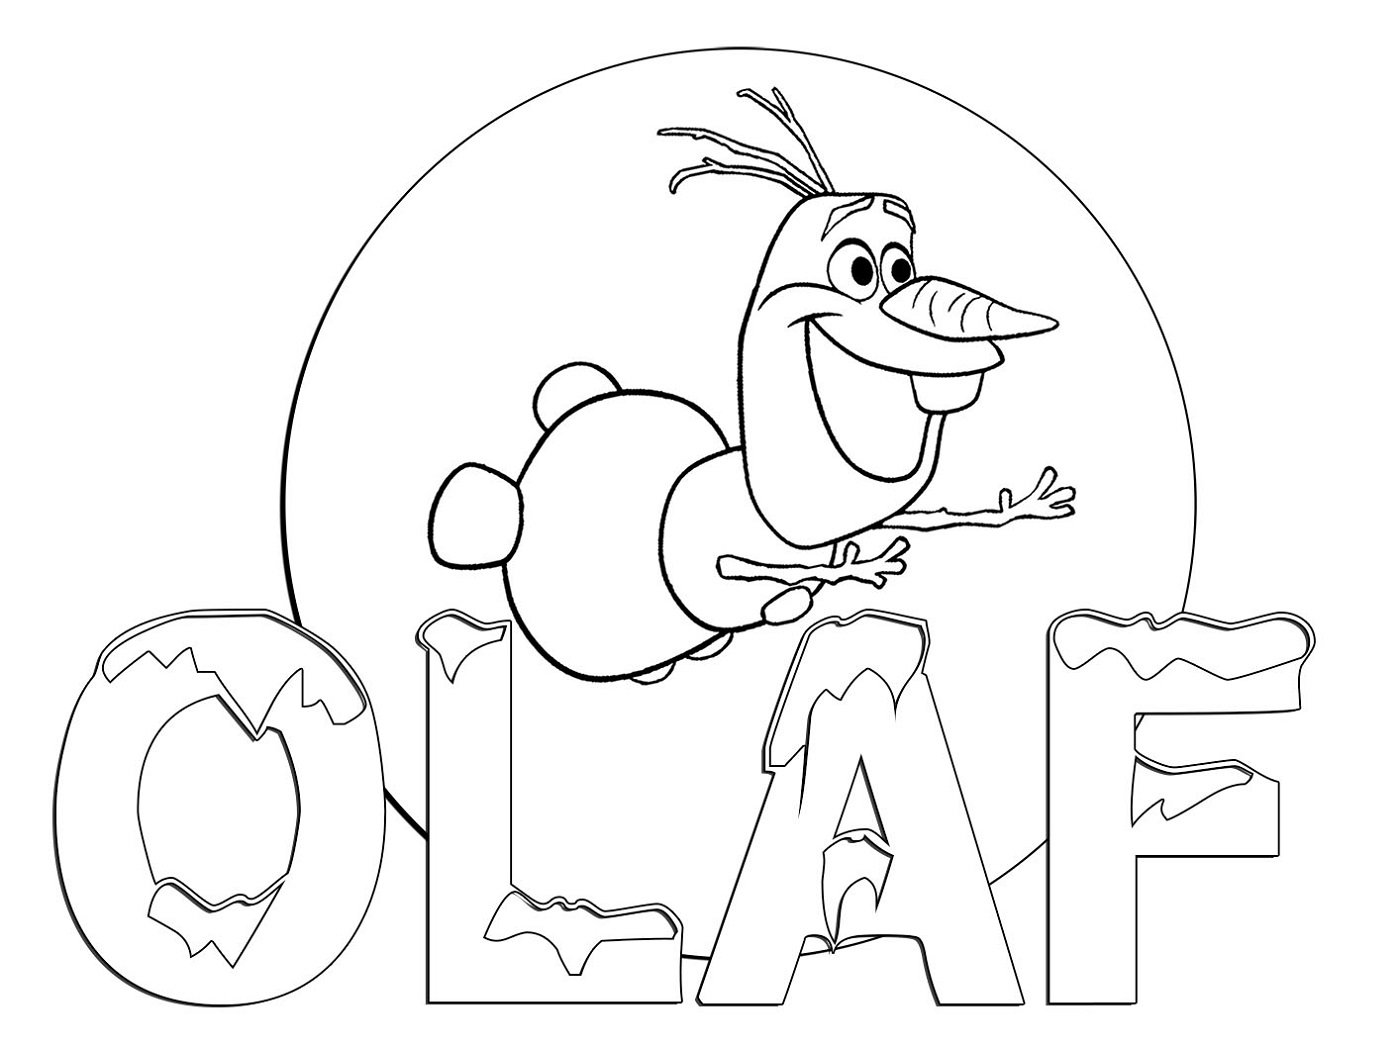 Fun Coloring Pages for Kids